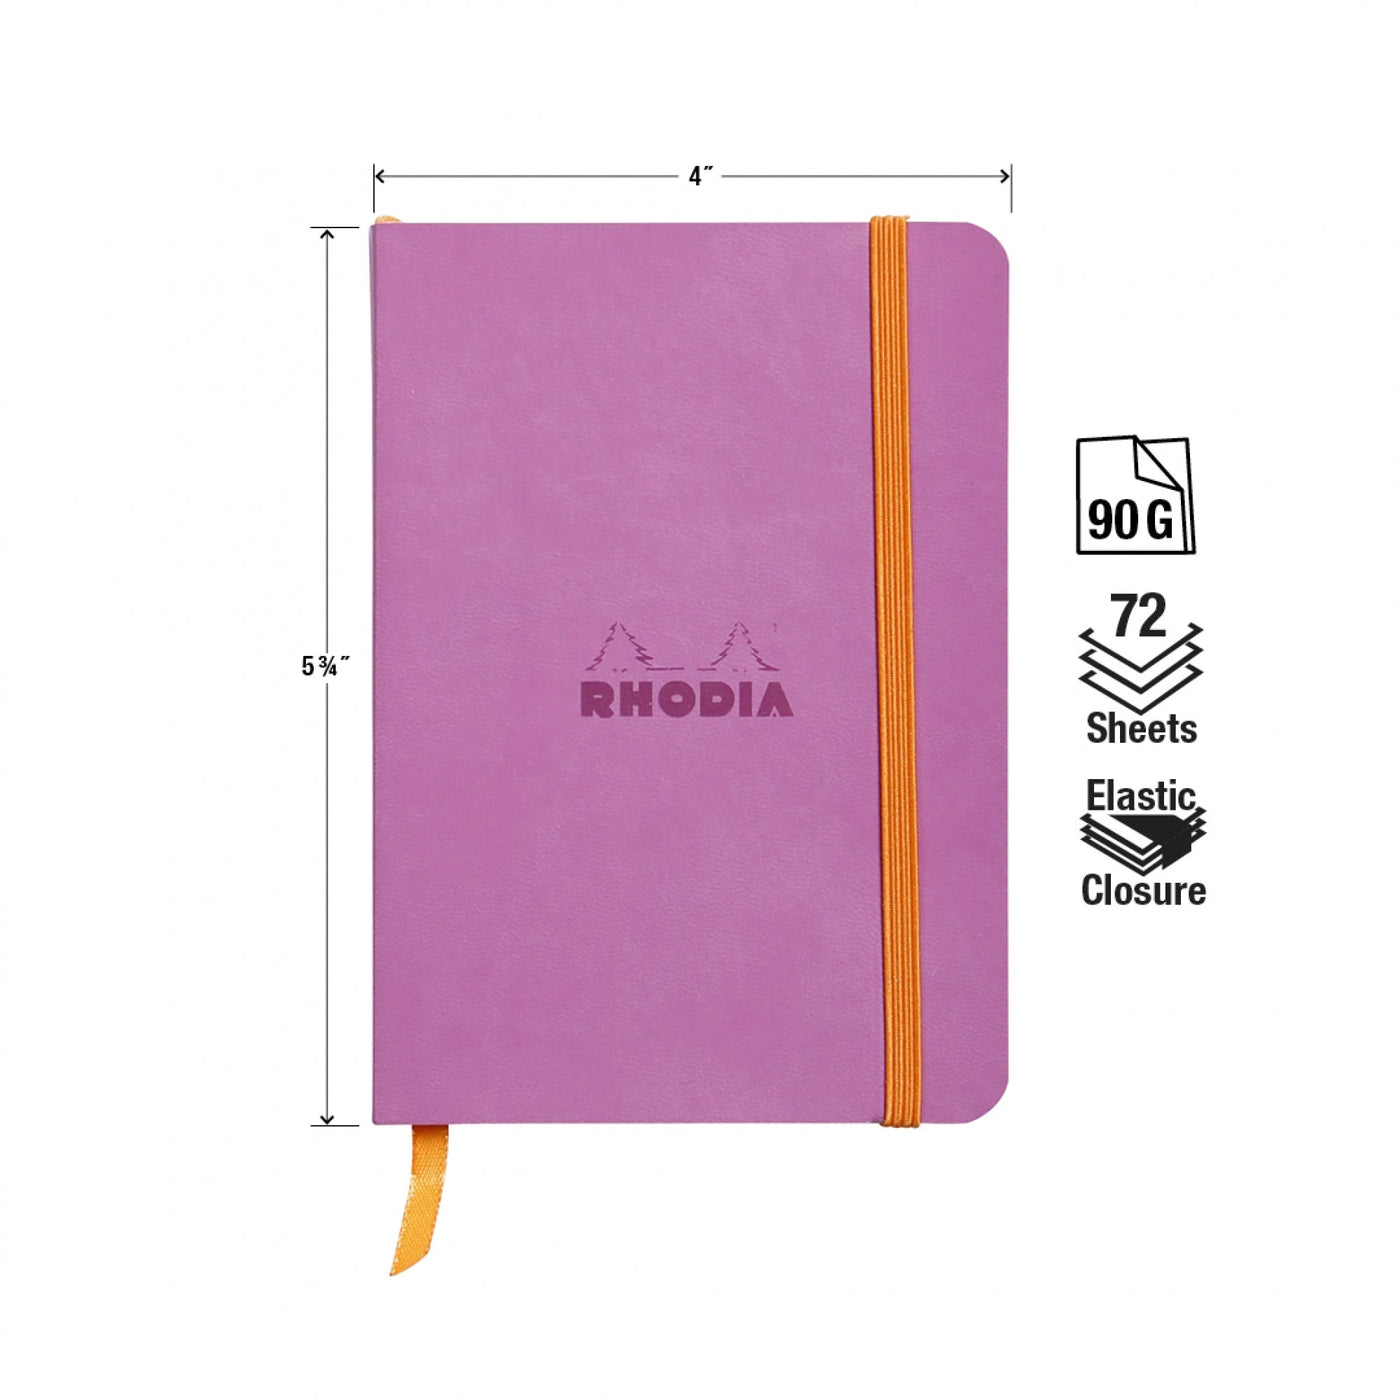 Rhodia Rhodiarama Lilac A6 Soft Cover Lined Notebook Measurements